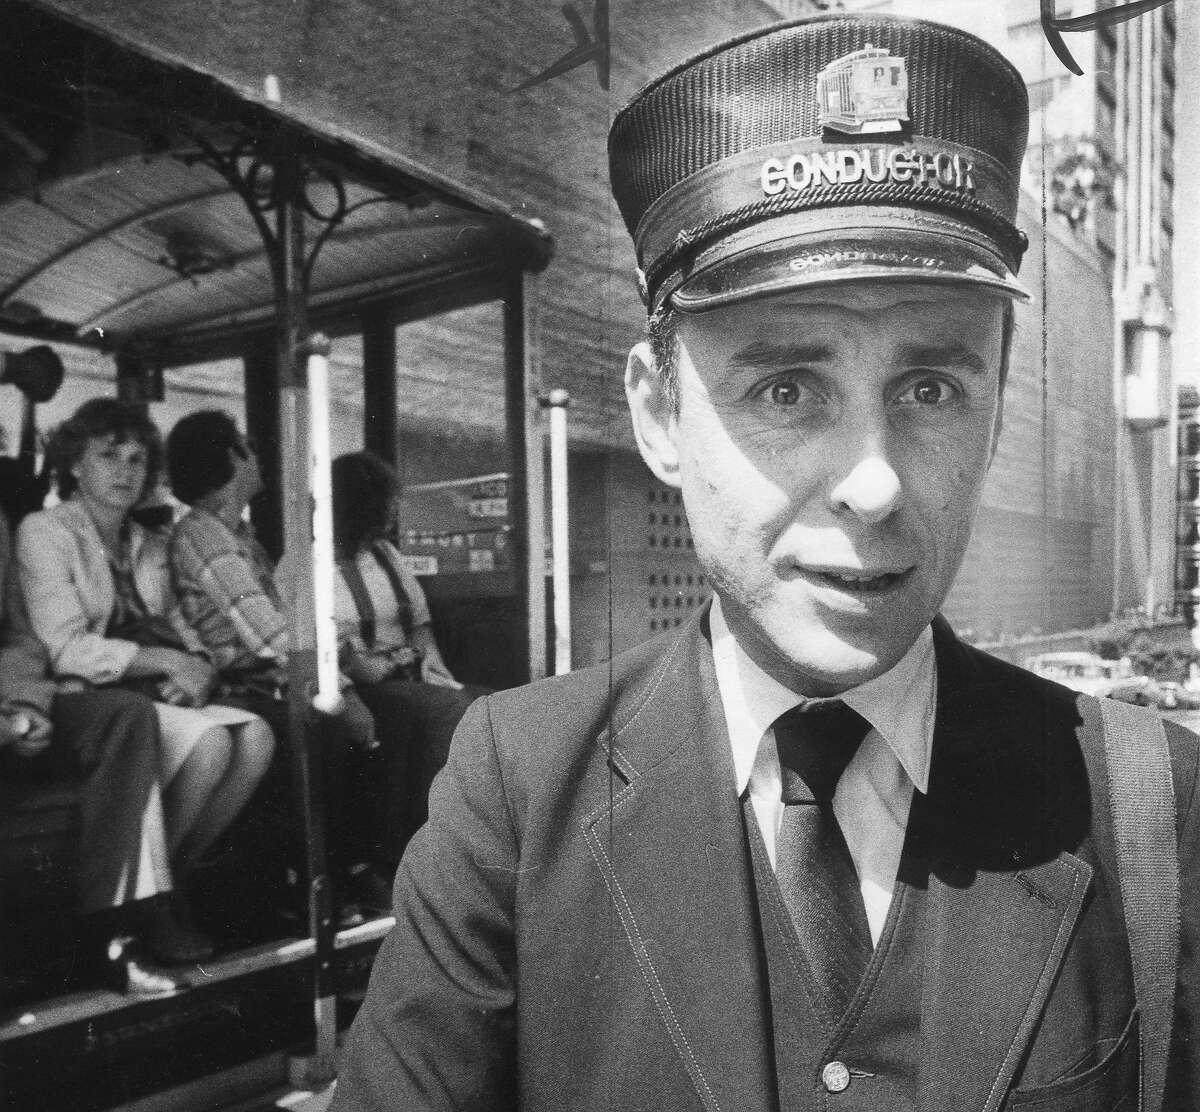 Muni Cable Car conductor Richard Morley, pictured on Sept. 14, 1982. Morley got in hot water with Muni for breaking the rules and making his own vintage uniform.